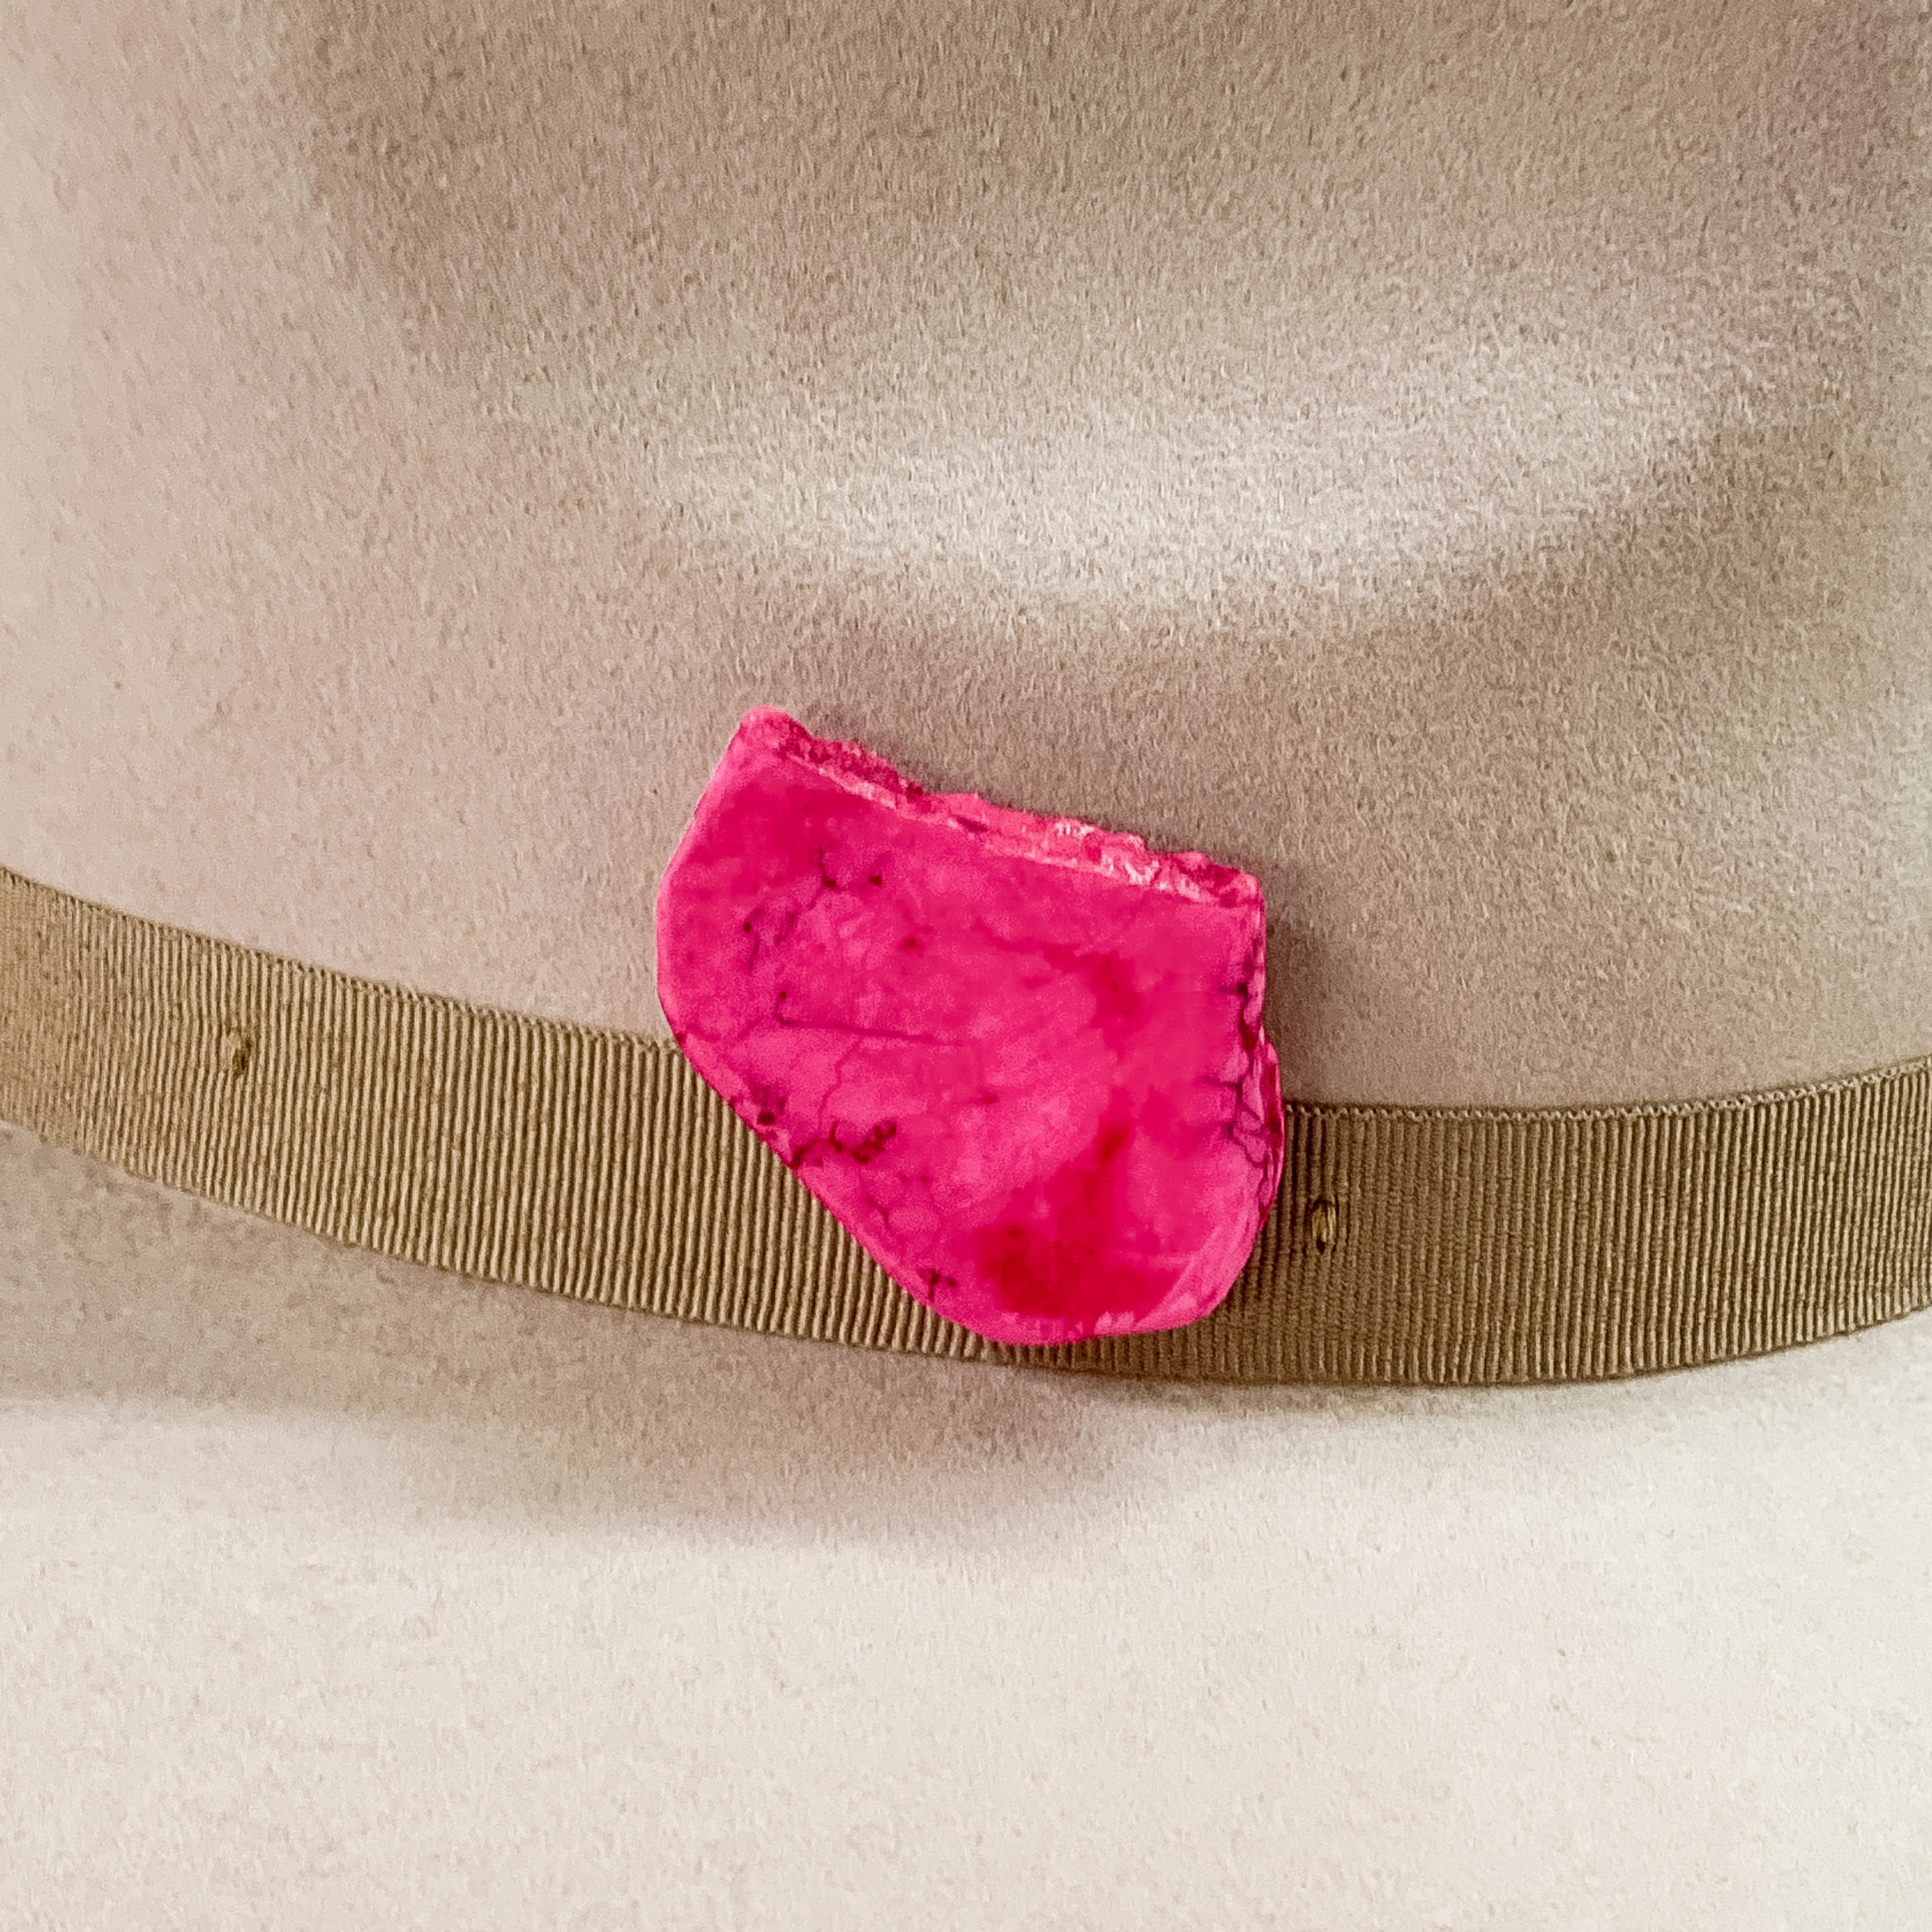 Pink stone with an irregular shape hat pin pictured on a beige colored hat. 